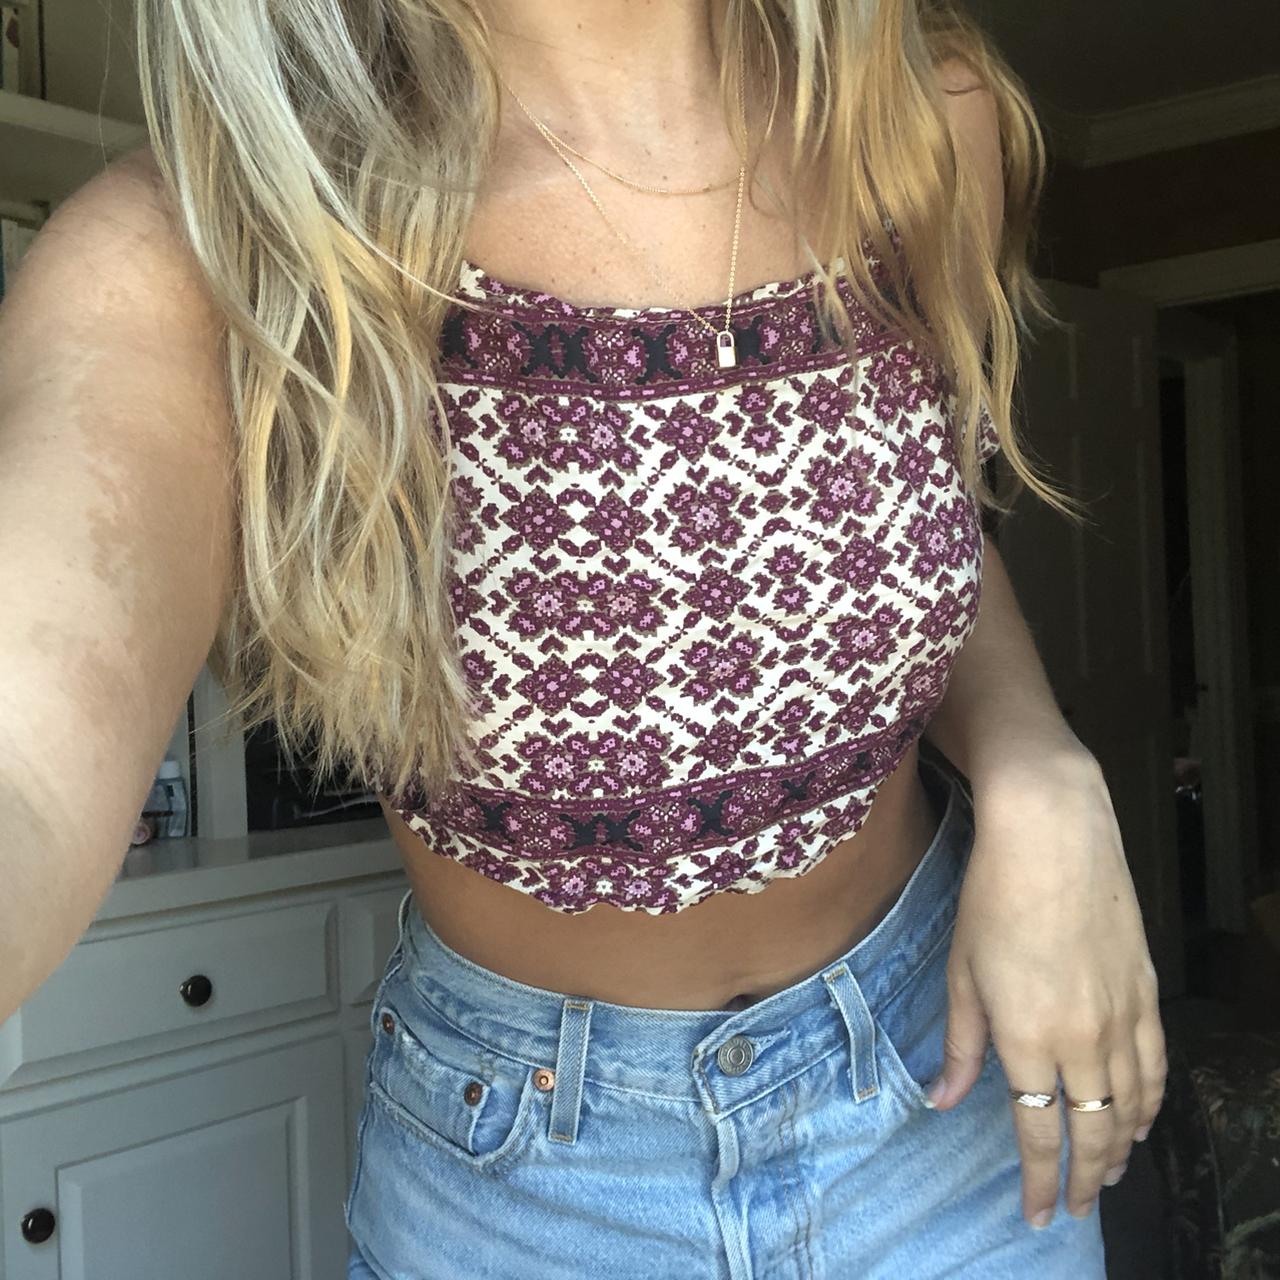 HIGHLY sought after BRANDY MELVILLE EDEN TOP 🧸💗 This